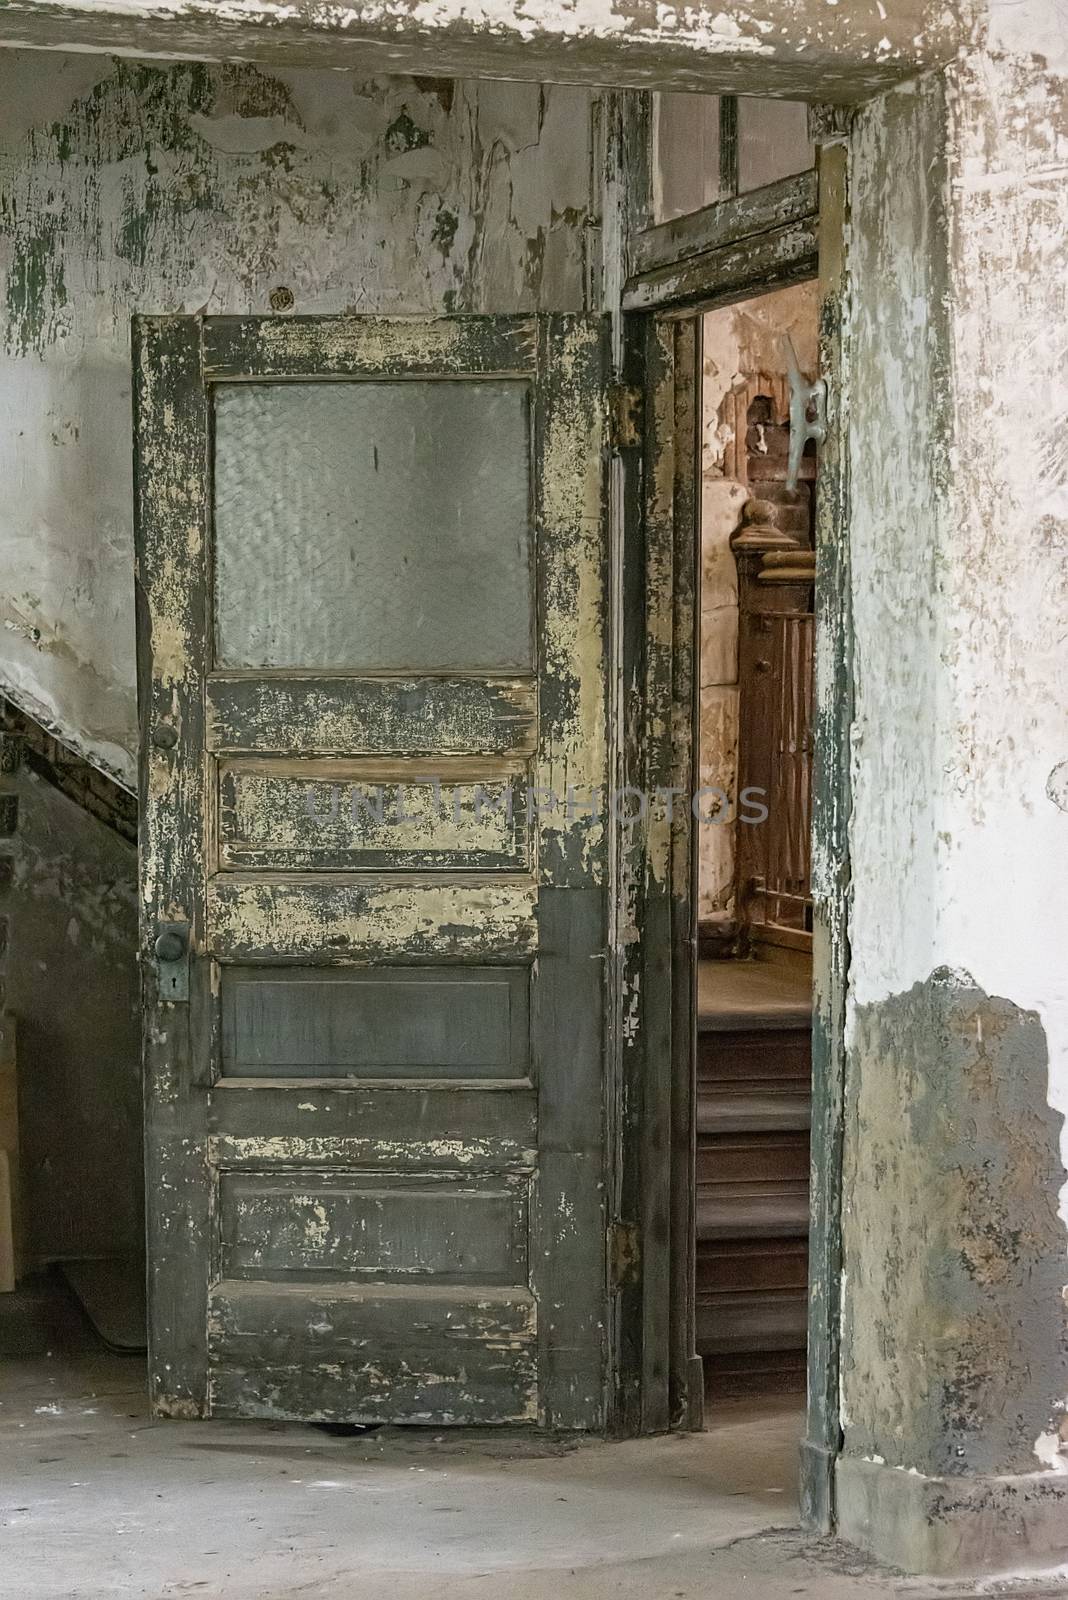 USA, New York, Ellis Island - May 2019: Pin flaking off an old interior door in an abandoned building